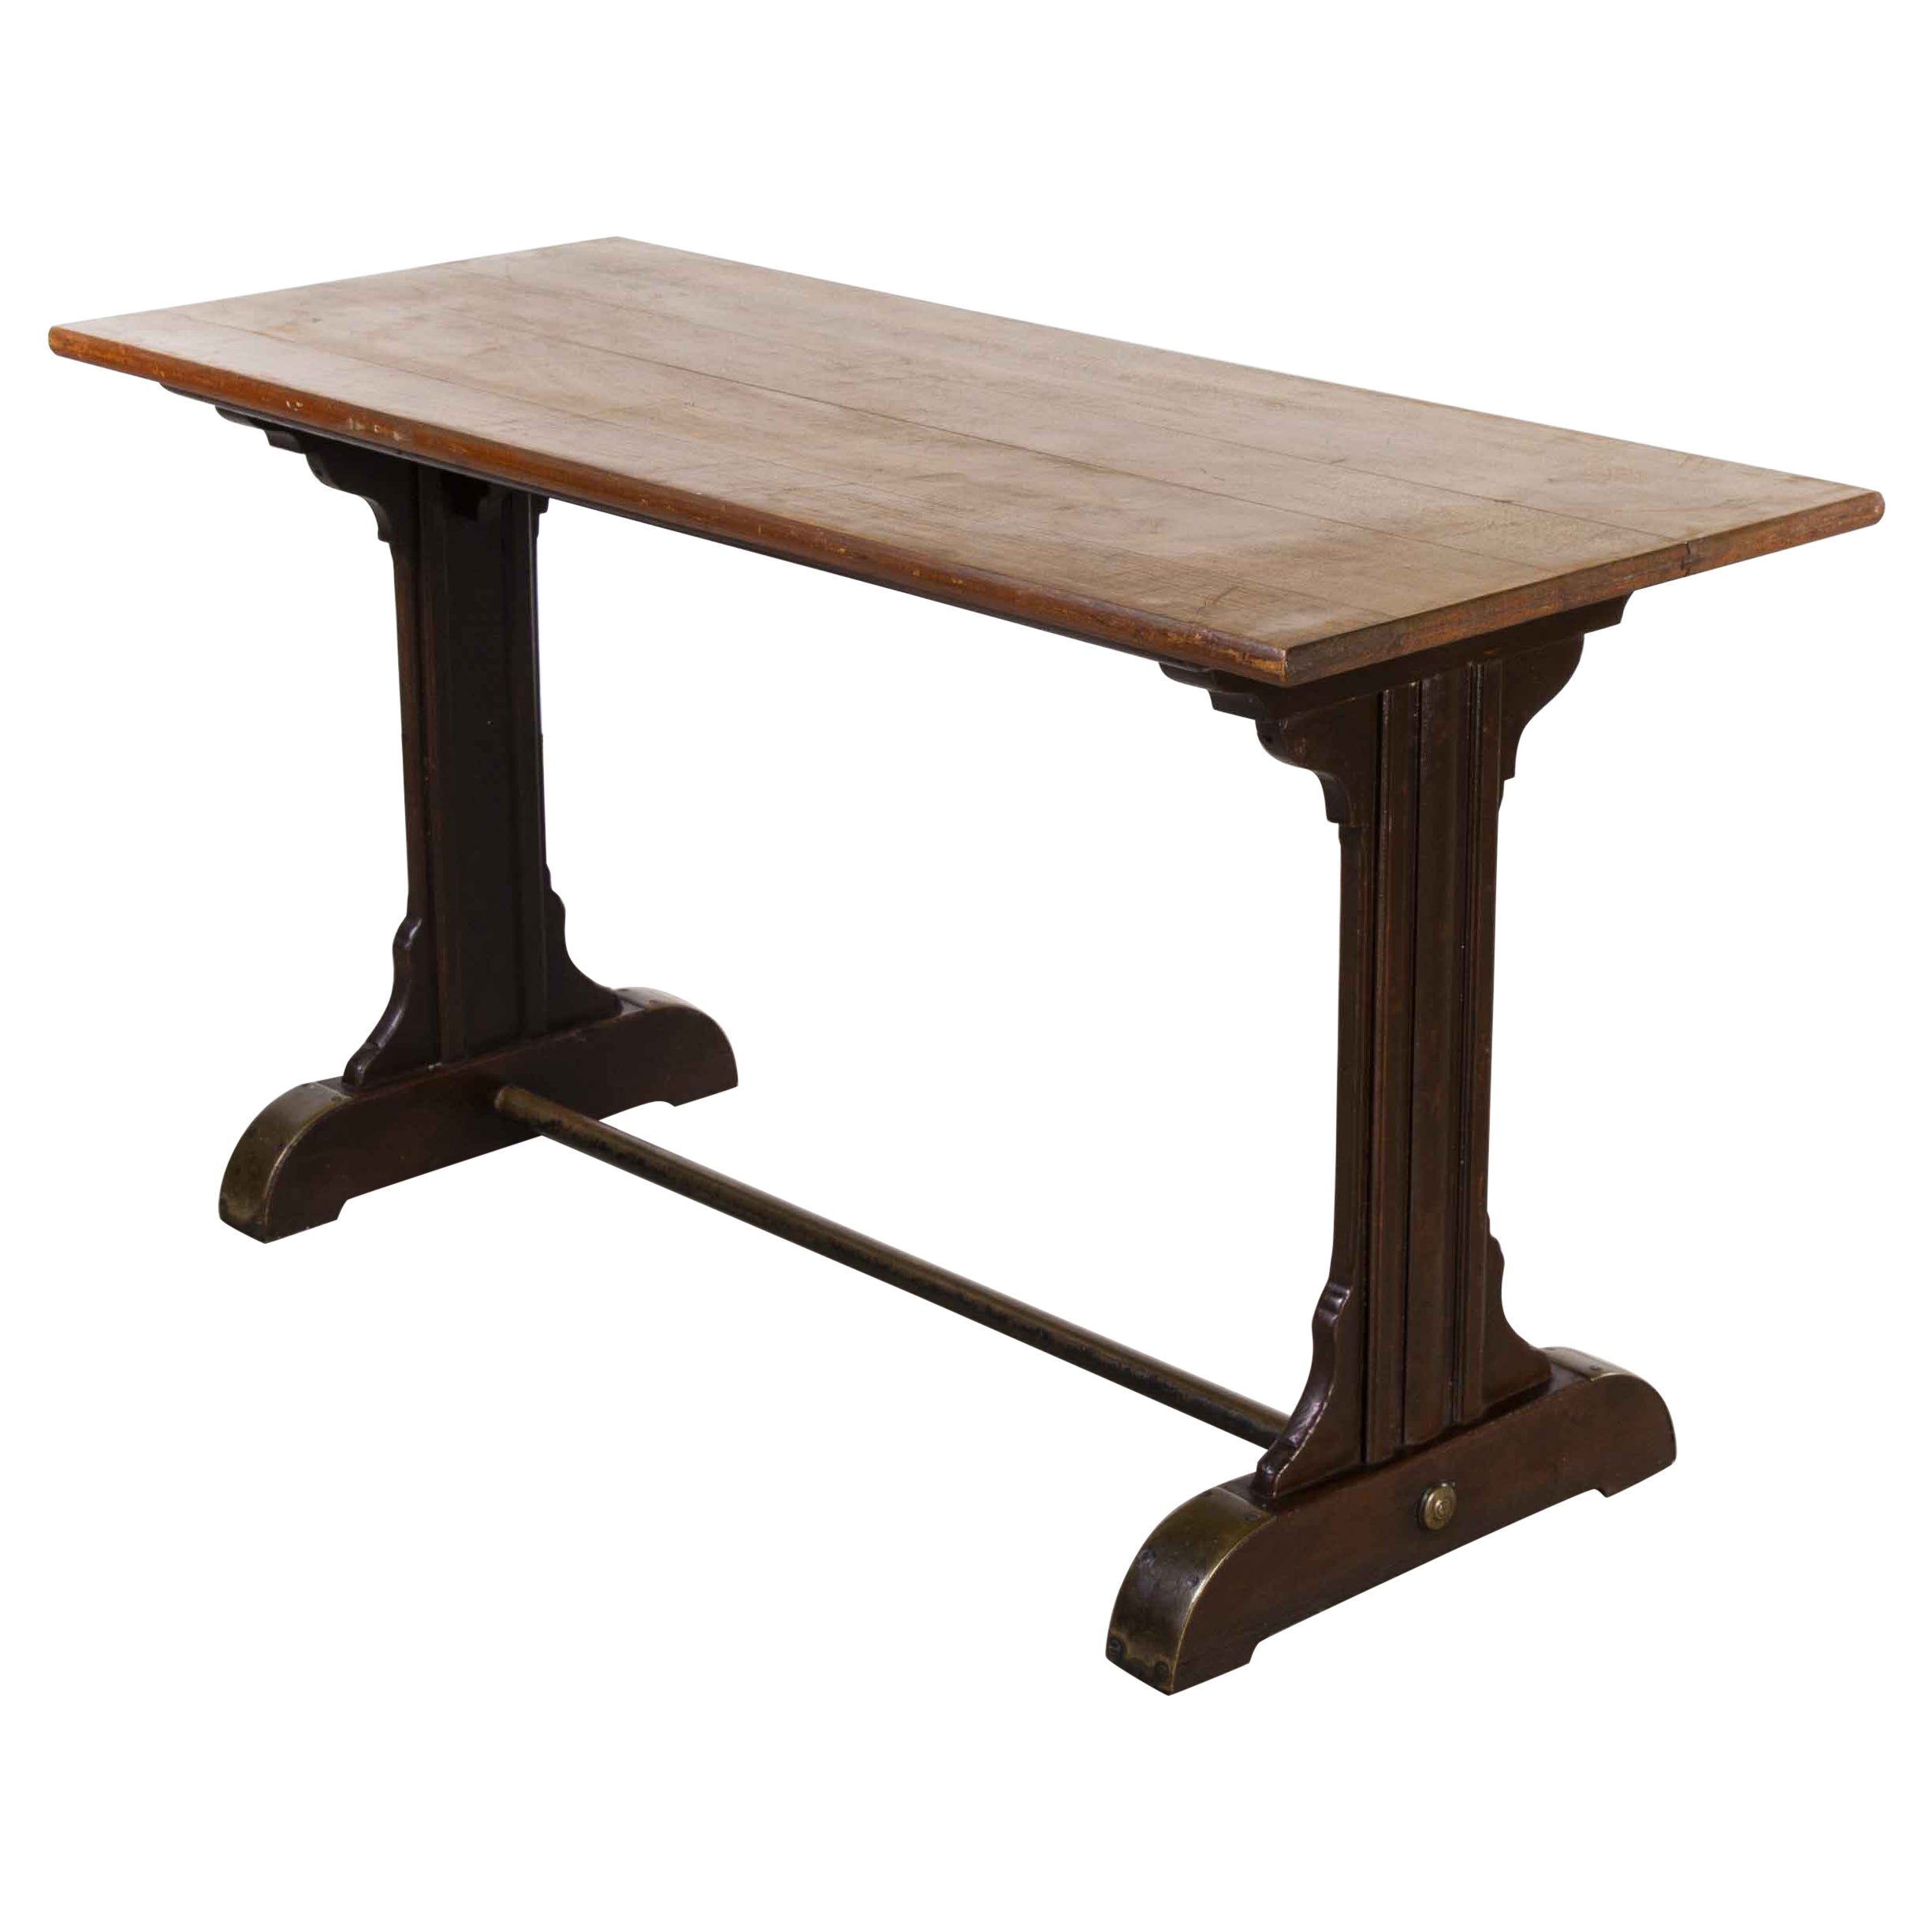 1930's Original French Café Table, Rectangular Dining Table 'Model 1114.1' For Sale